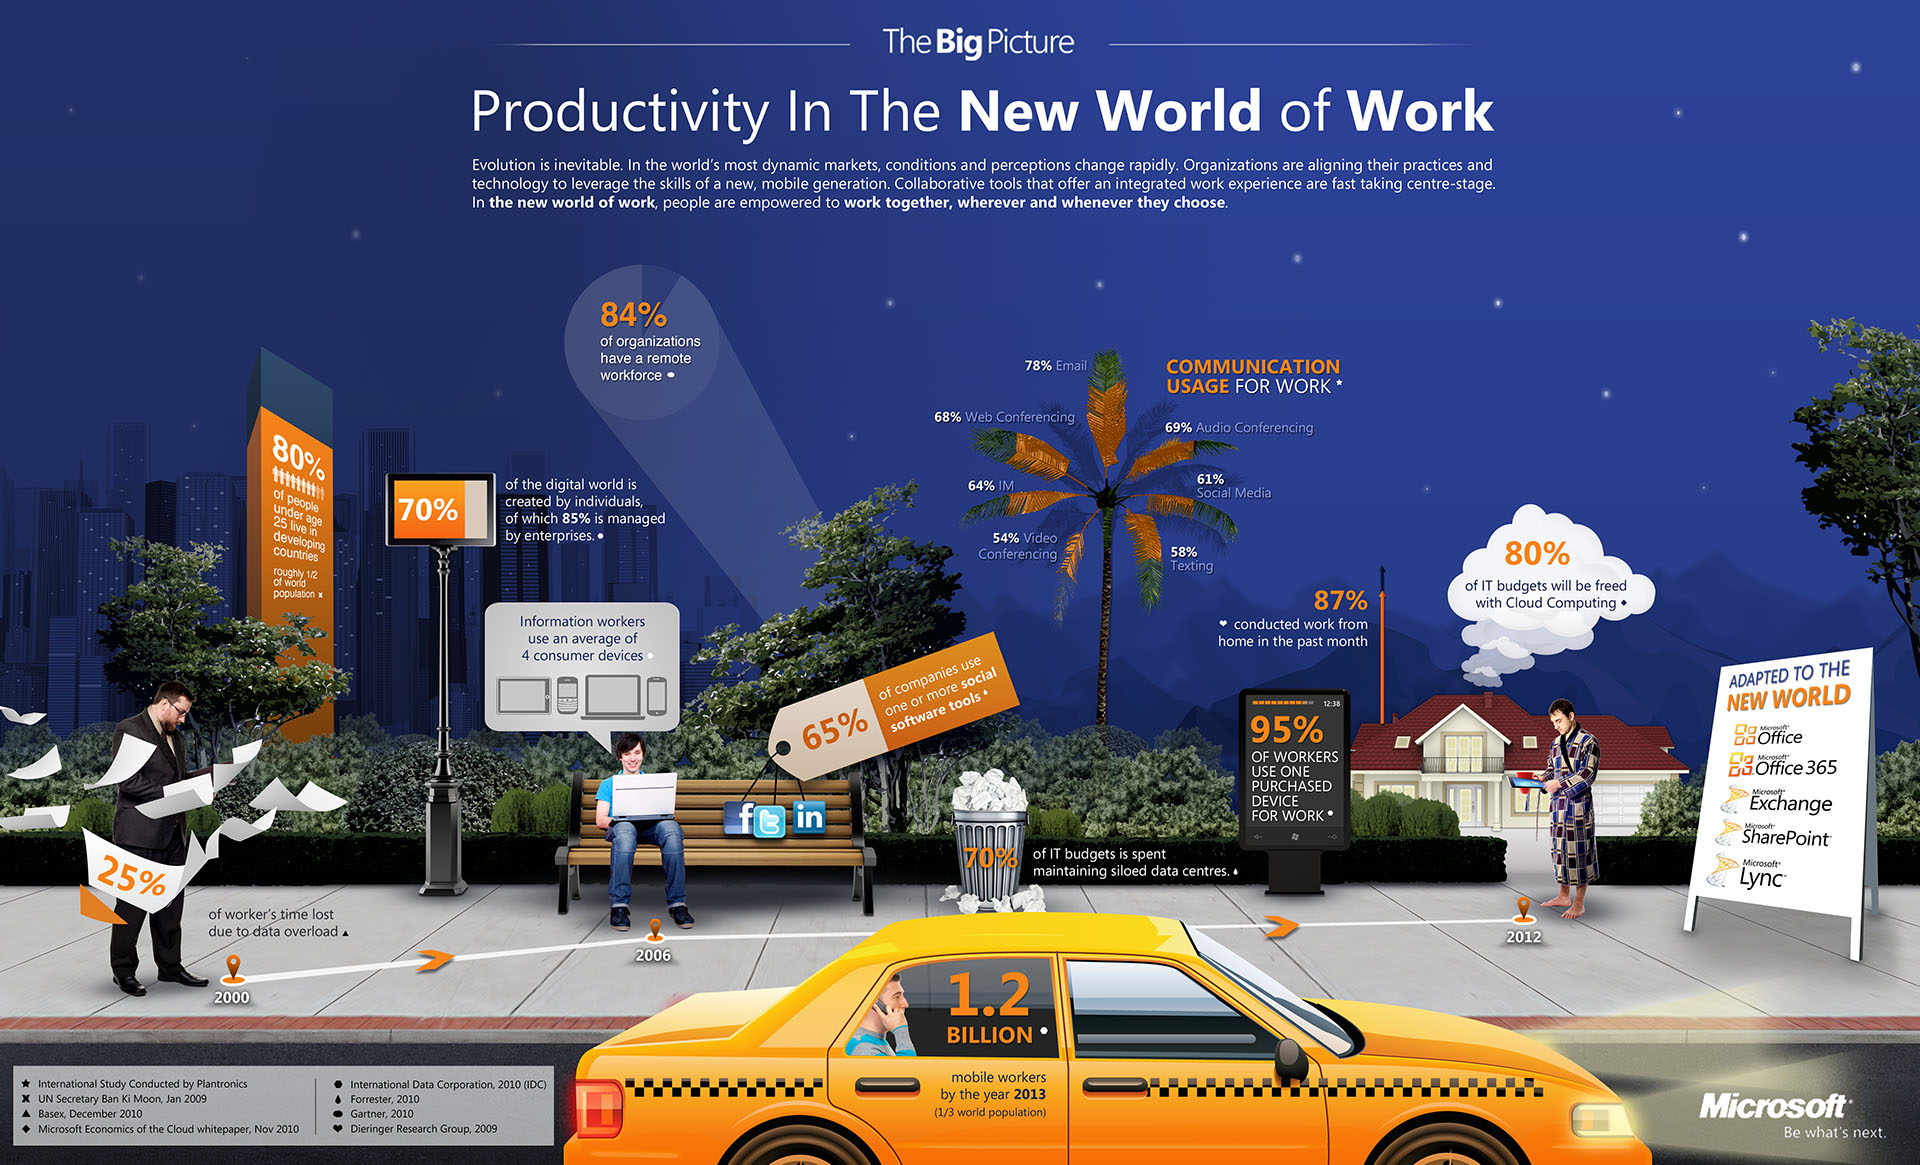 New World Of Work at Microsoft: A Dynamic Work Environment